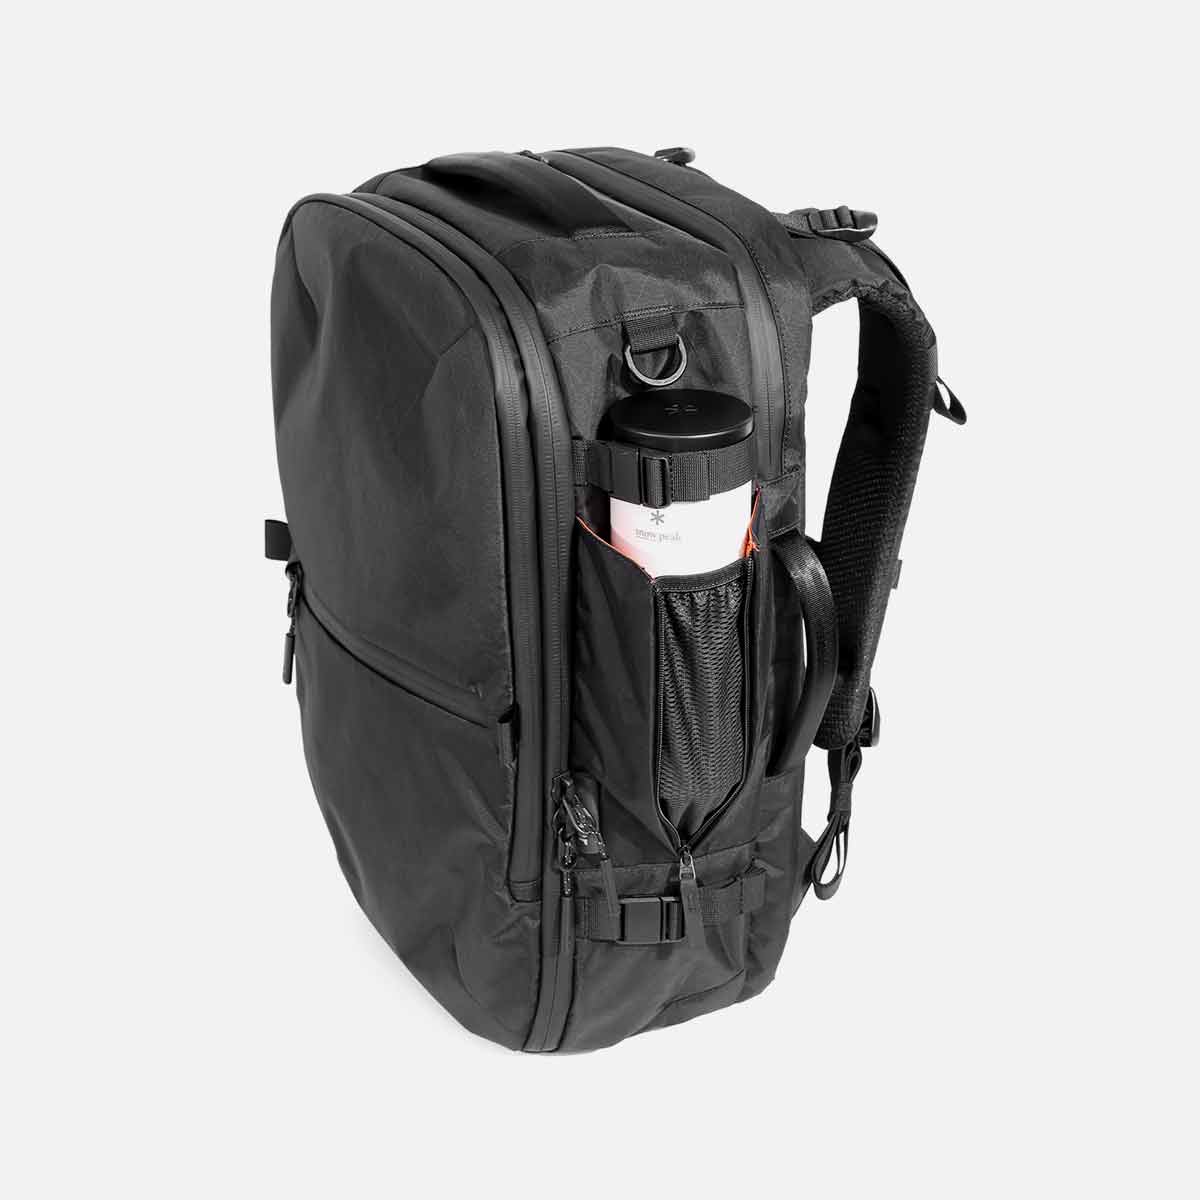 Aer Travel pack 2 x-pac バックパック